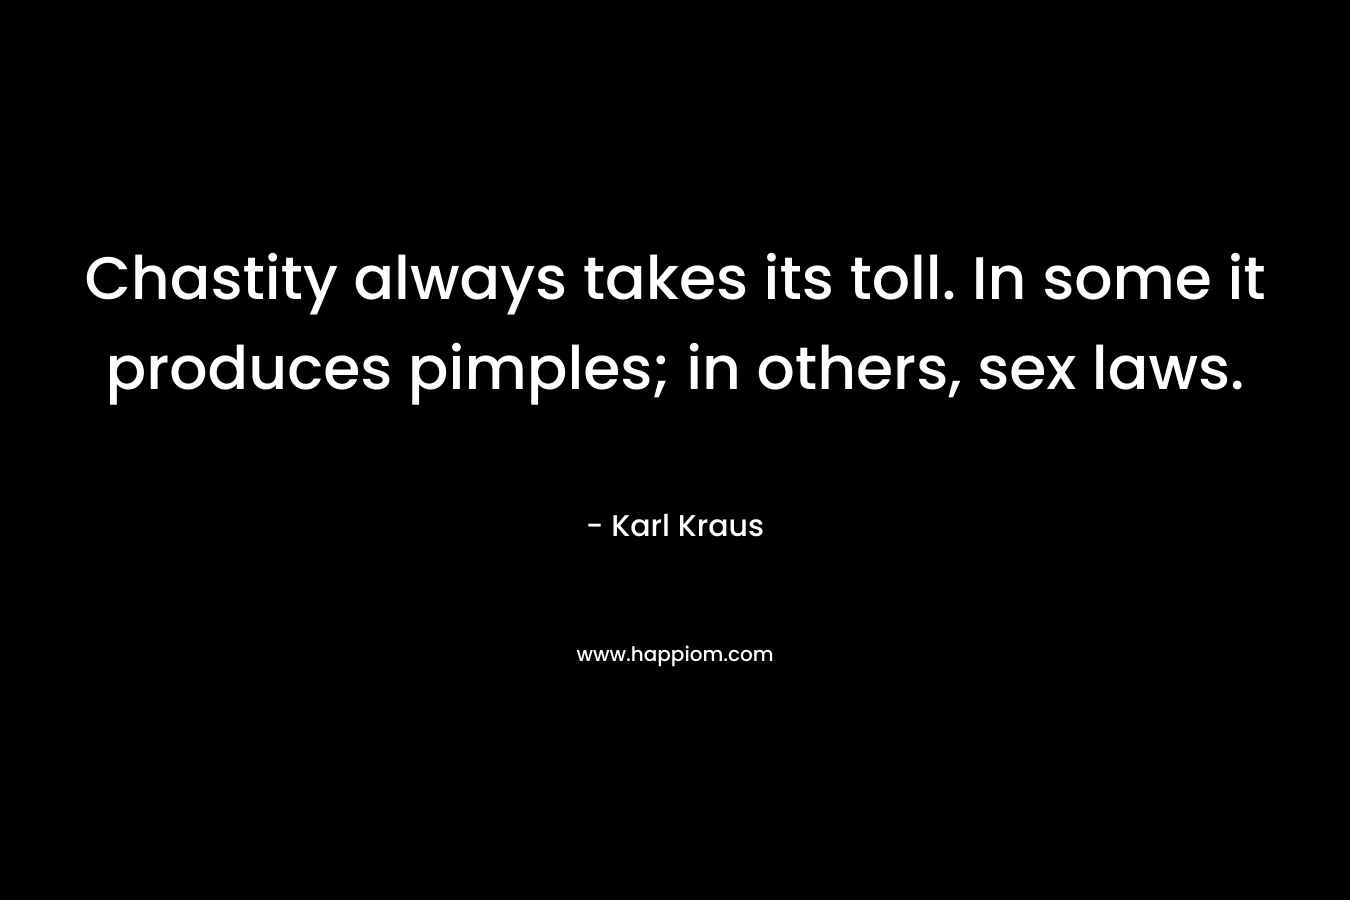 Chastity always takes its toll. In some it produces pimples; in others, sex laws. – Karl Kraus